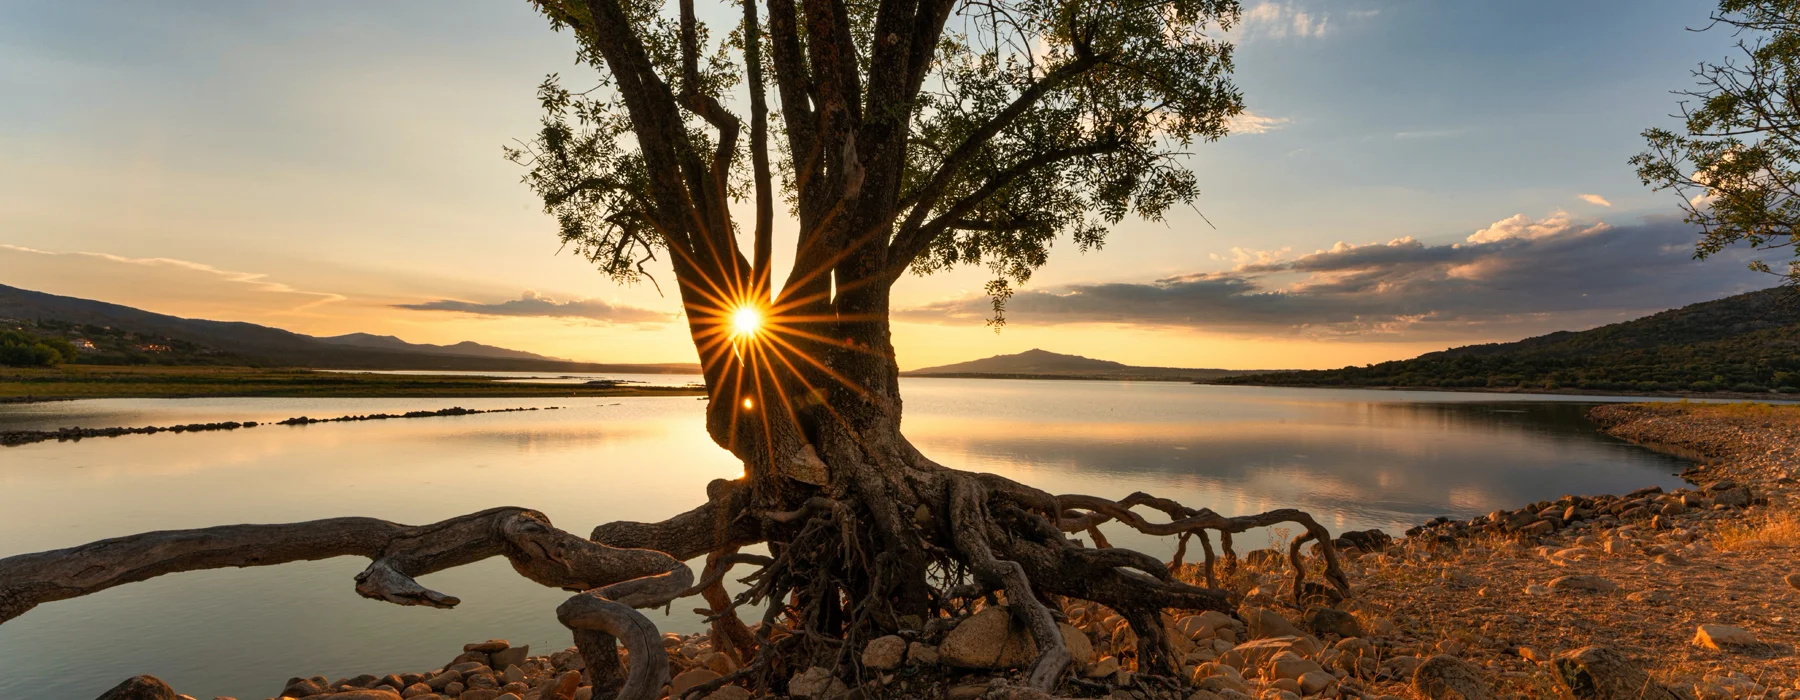 A tree on a lake shore with its root system exposed and the sun peeking through its branches symbolizing Life Temple’s mission of sacredness